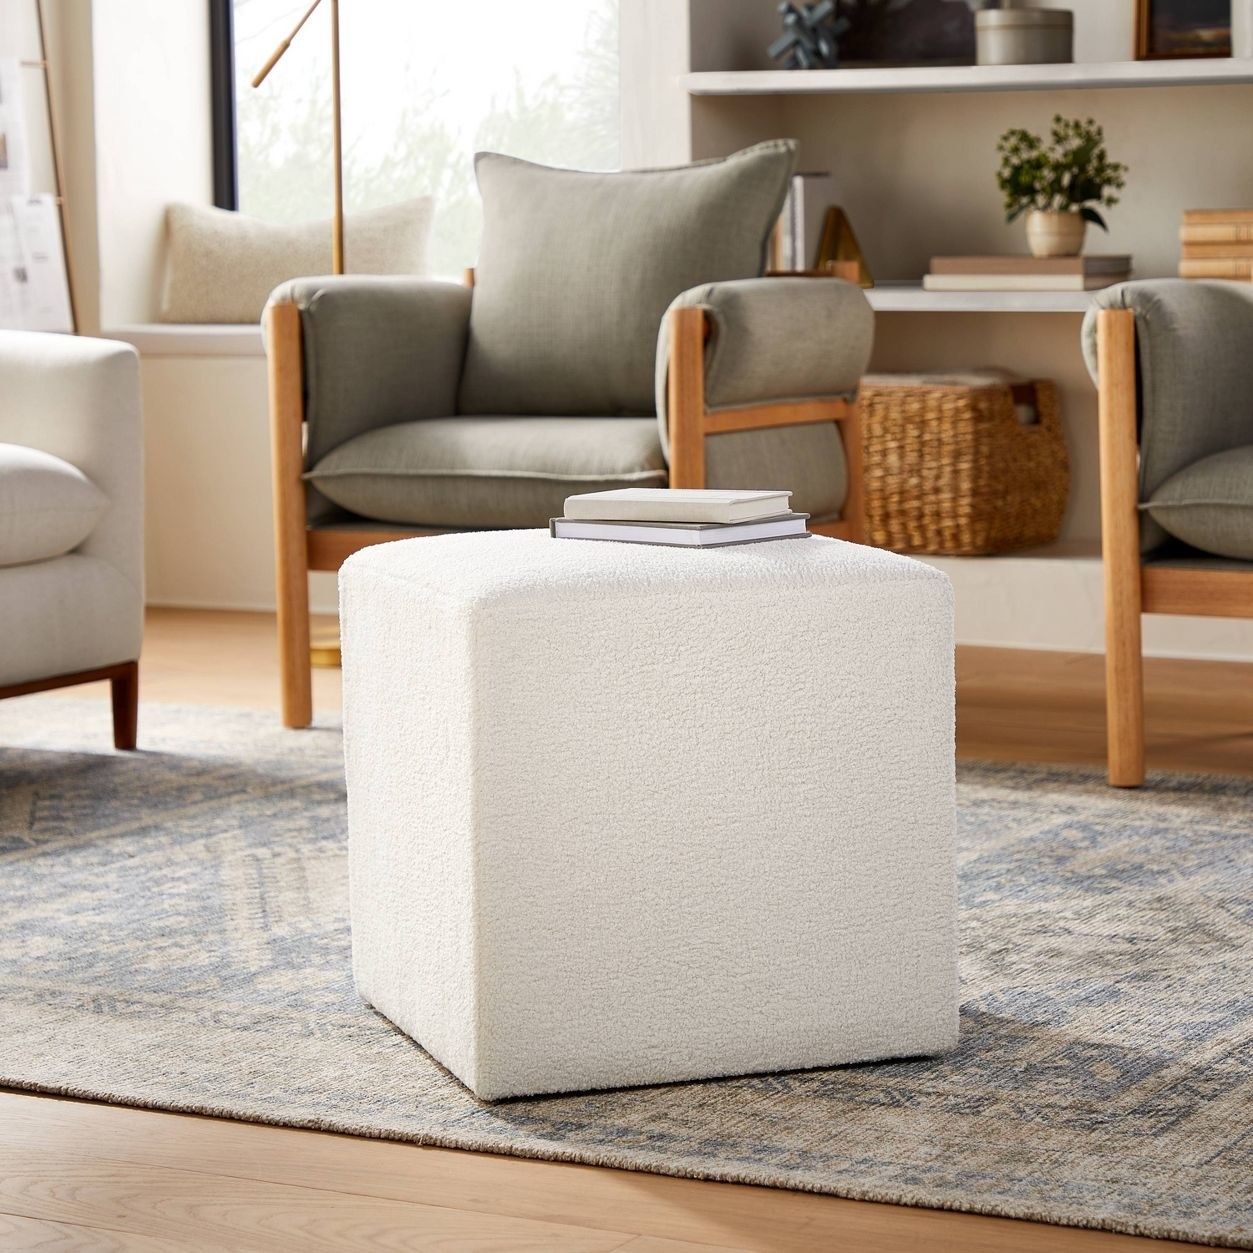 The cube in cream boucle in a living room